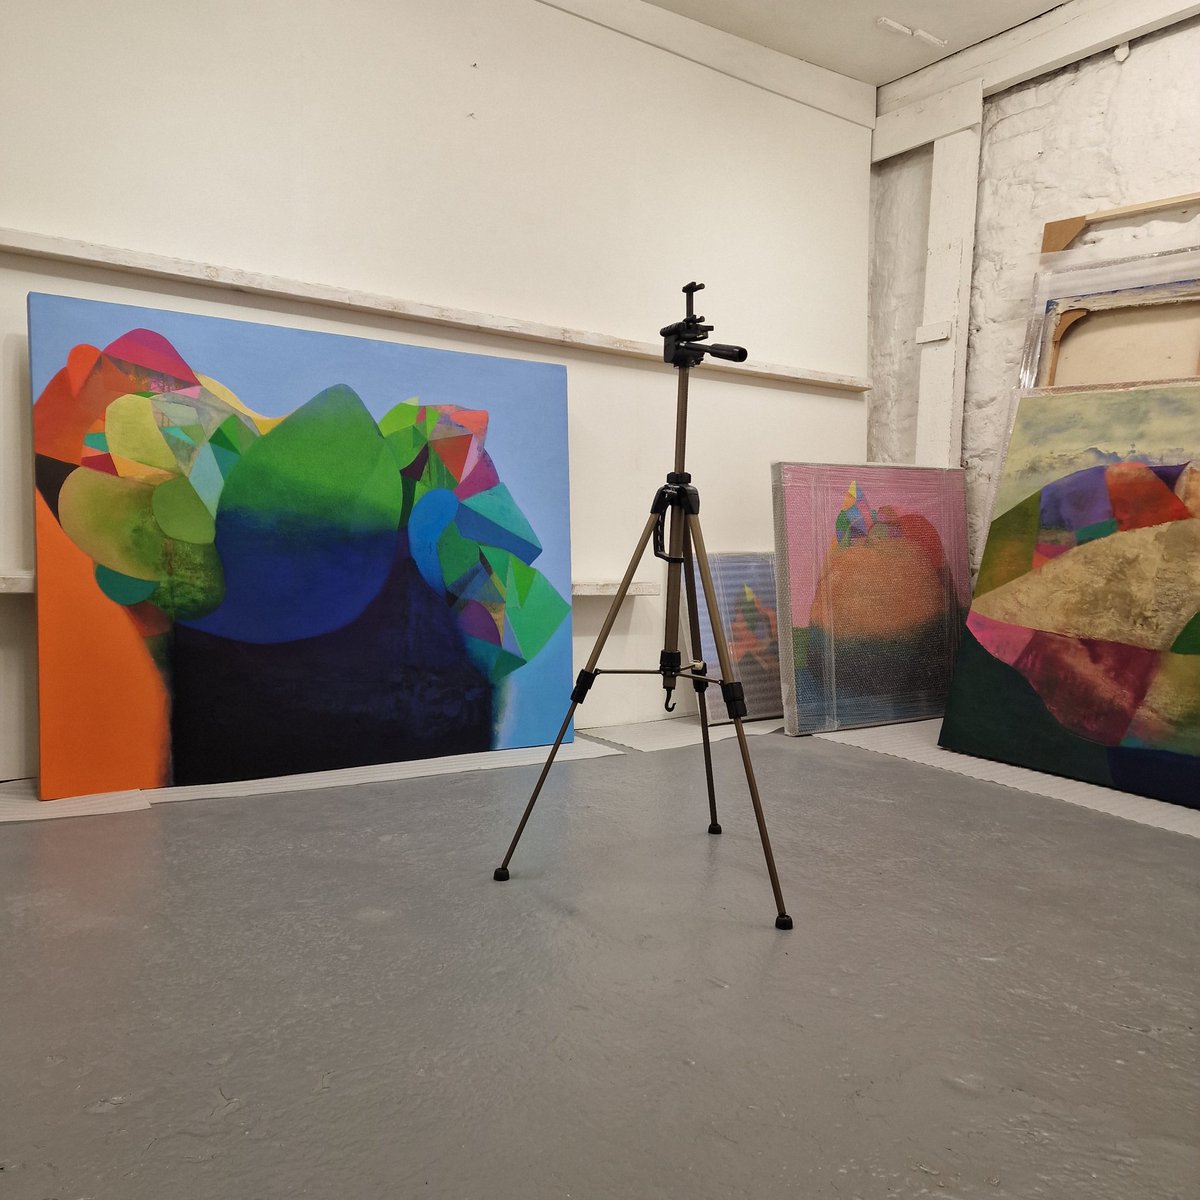 Photographing and wrapping some work for Solomon Fine Art. Their upcoming exhibition is the Summer one, which opens on Thursday the 27th of July. @SolomonFineArt #upcomingexhibition #summerexhibition #contemporarypainting #contemporaryart #solomonfineart #tomcliment